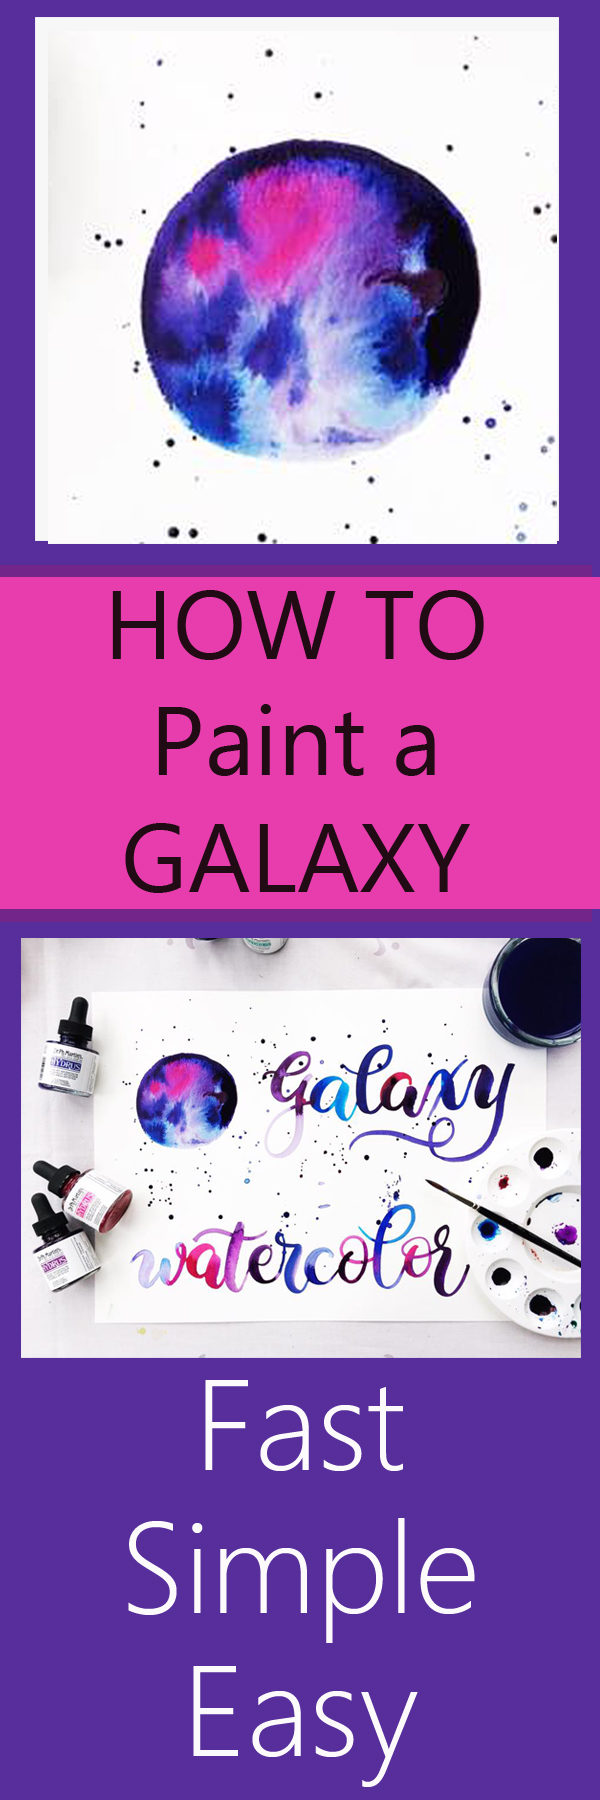 One of the best YouTube tutorials about galaxy painting I've found www.kellycreates.ca